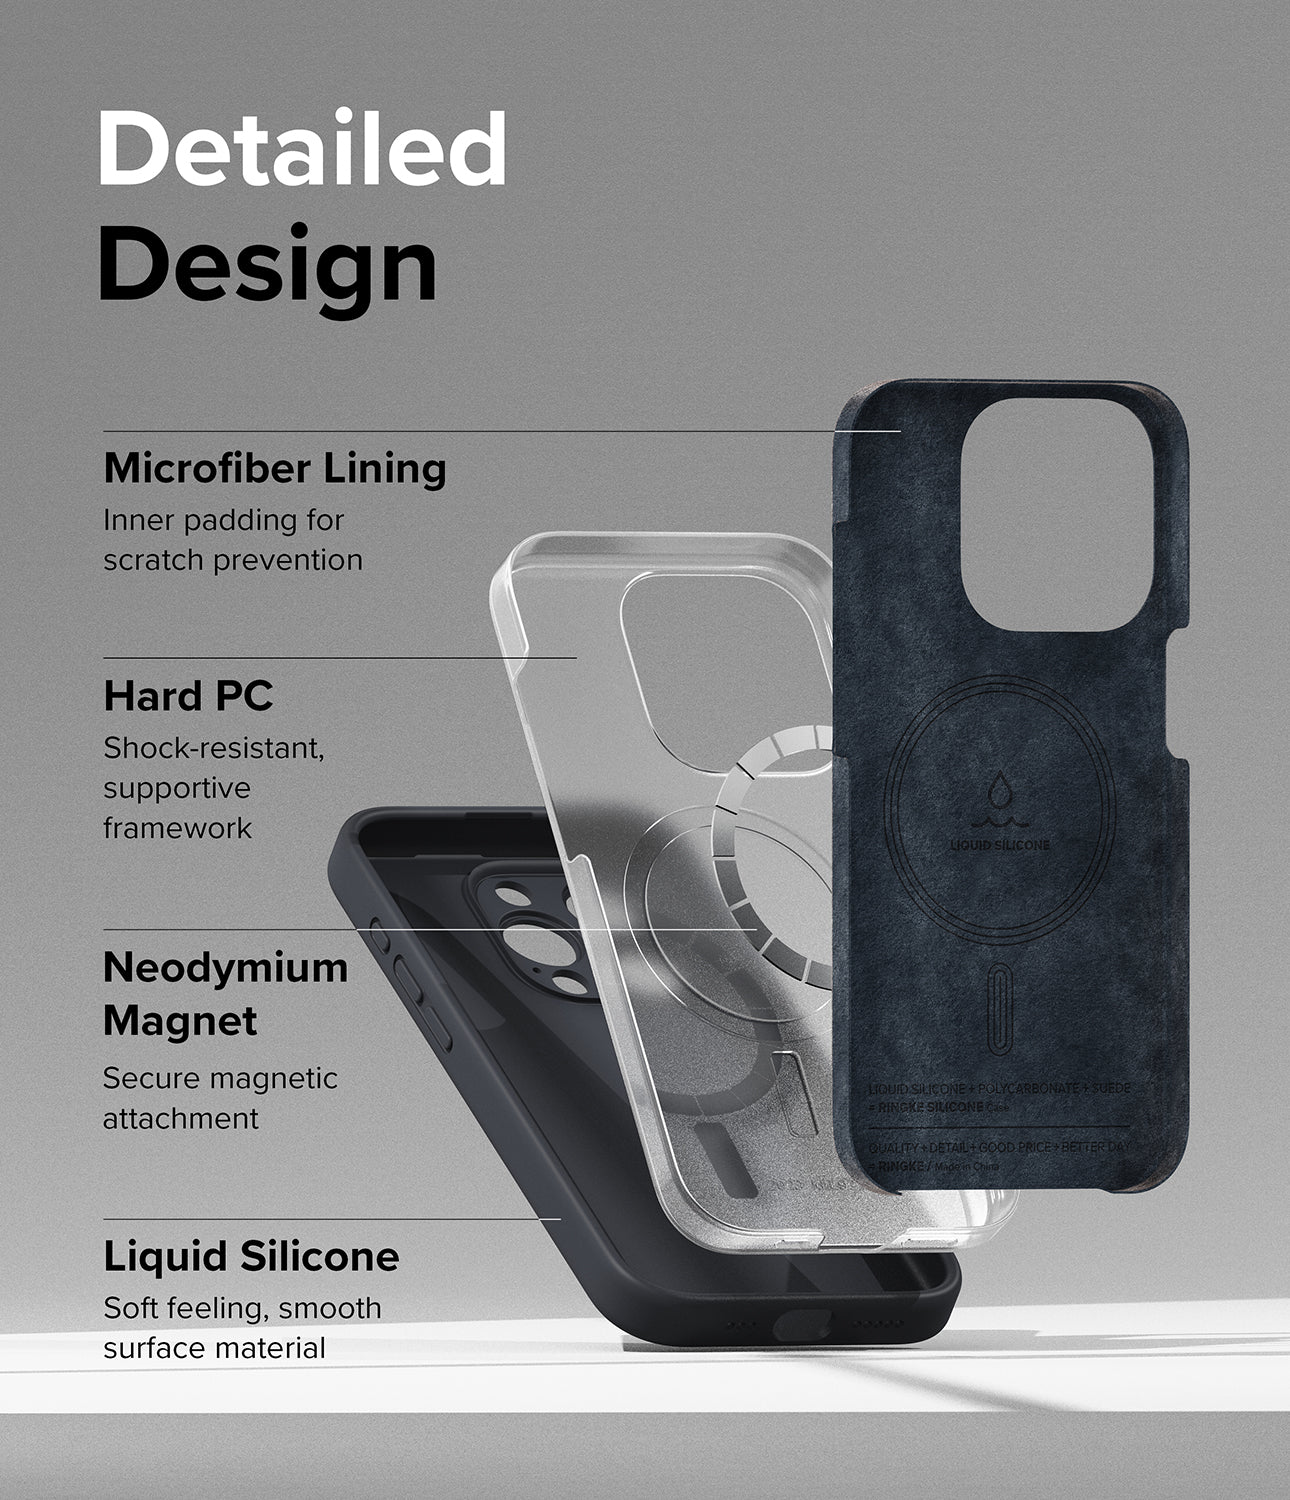 iPhone 15 Pro Max Case | Silicone Magnetic - Deep Blue - Detailed Design. Inner padding for scratch prevention with Microfiber Lining. Shock-resistant supportive framework with Hard PC. Neodymium Magnet to secure magnetic attachment. Soft feeling, smooth surface material with Liquid Silicone.